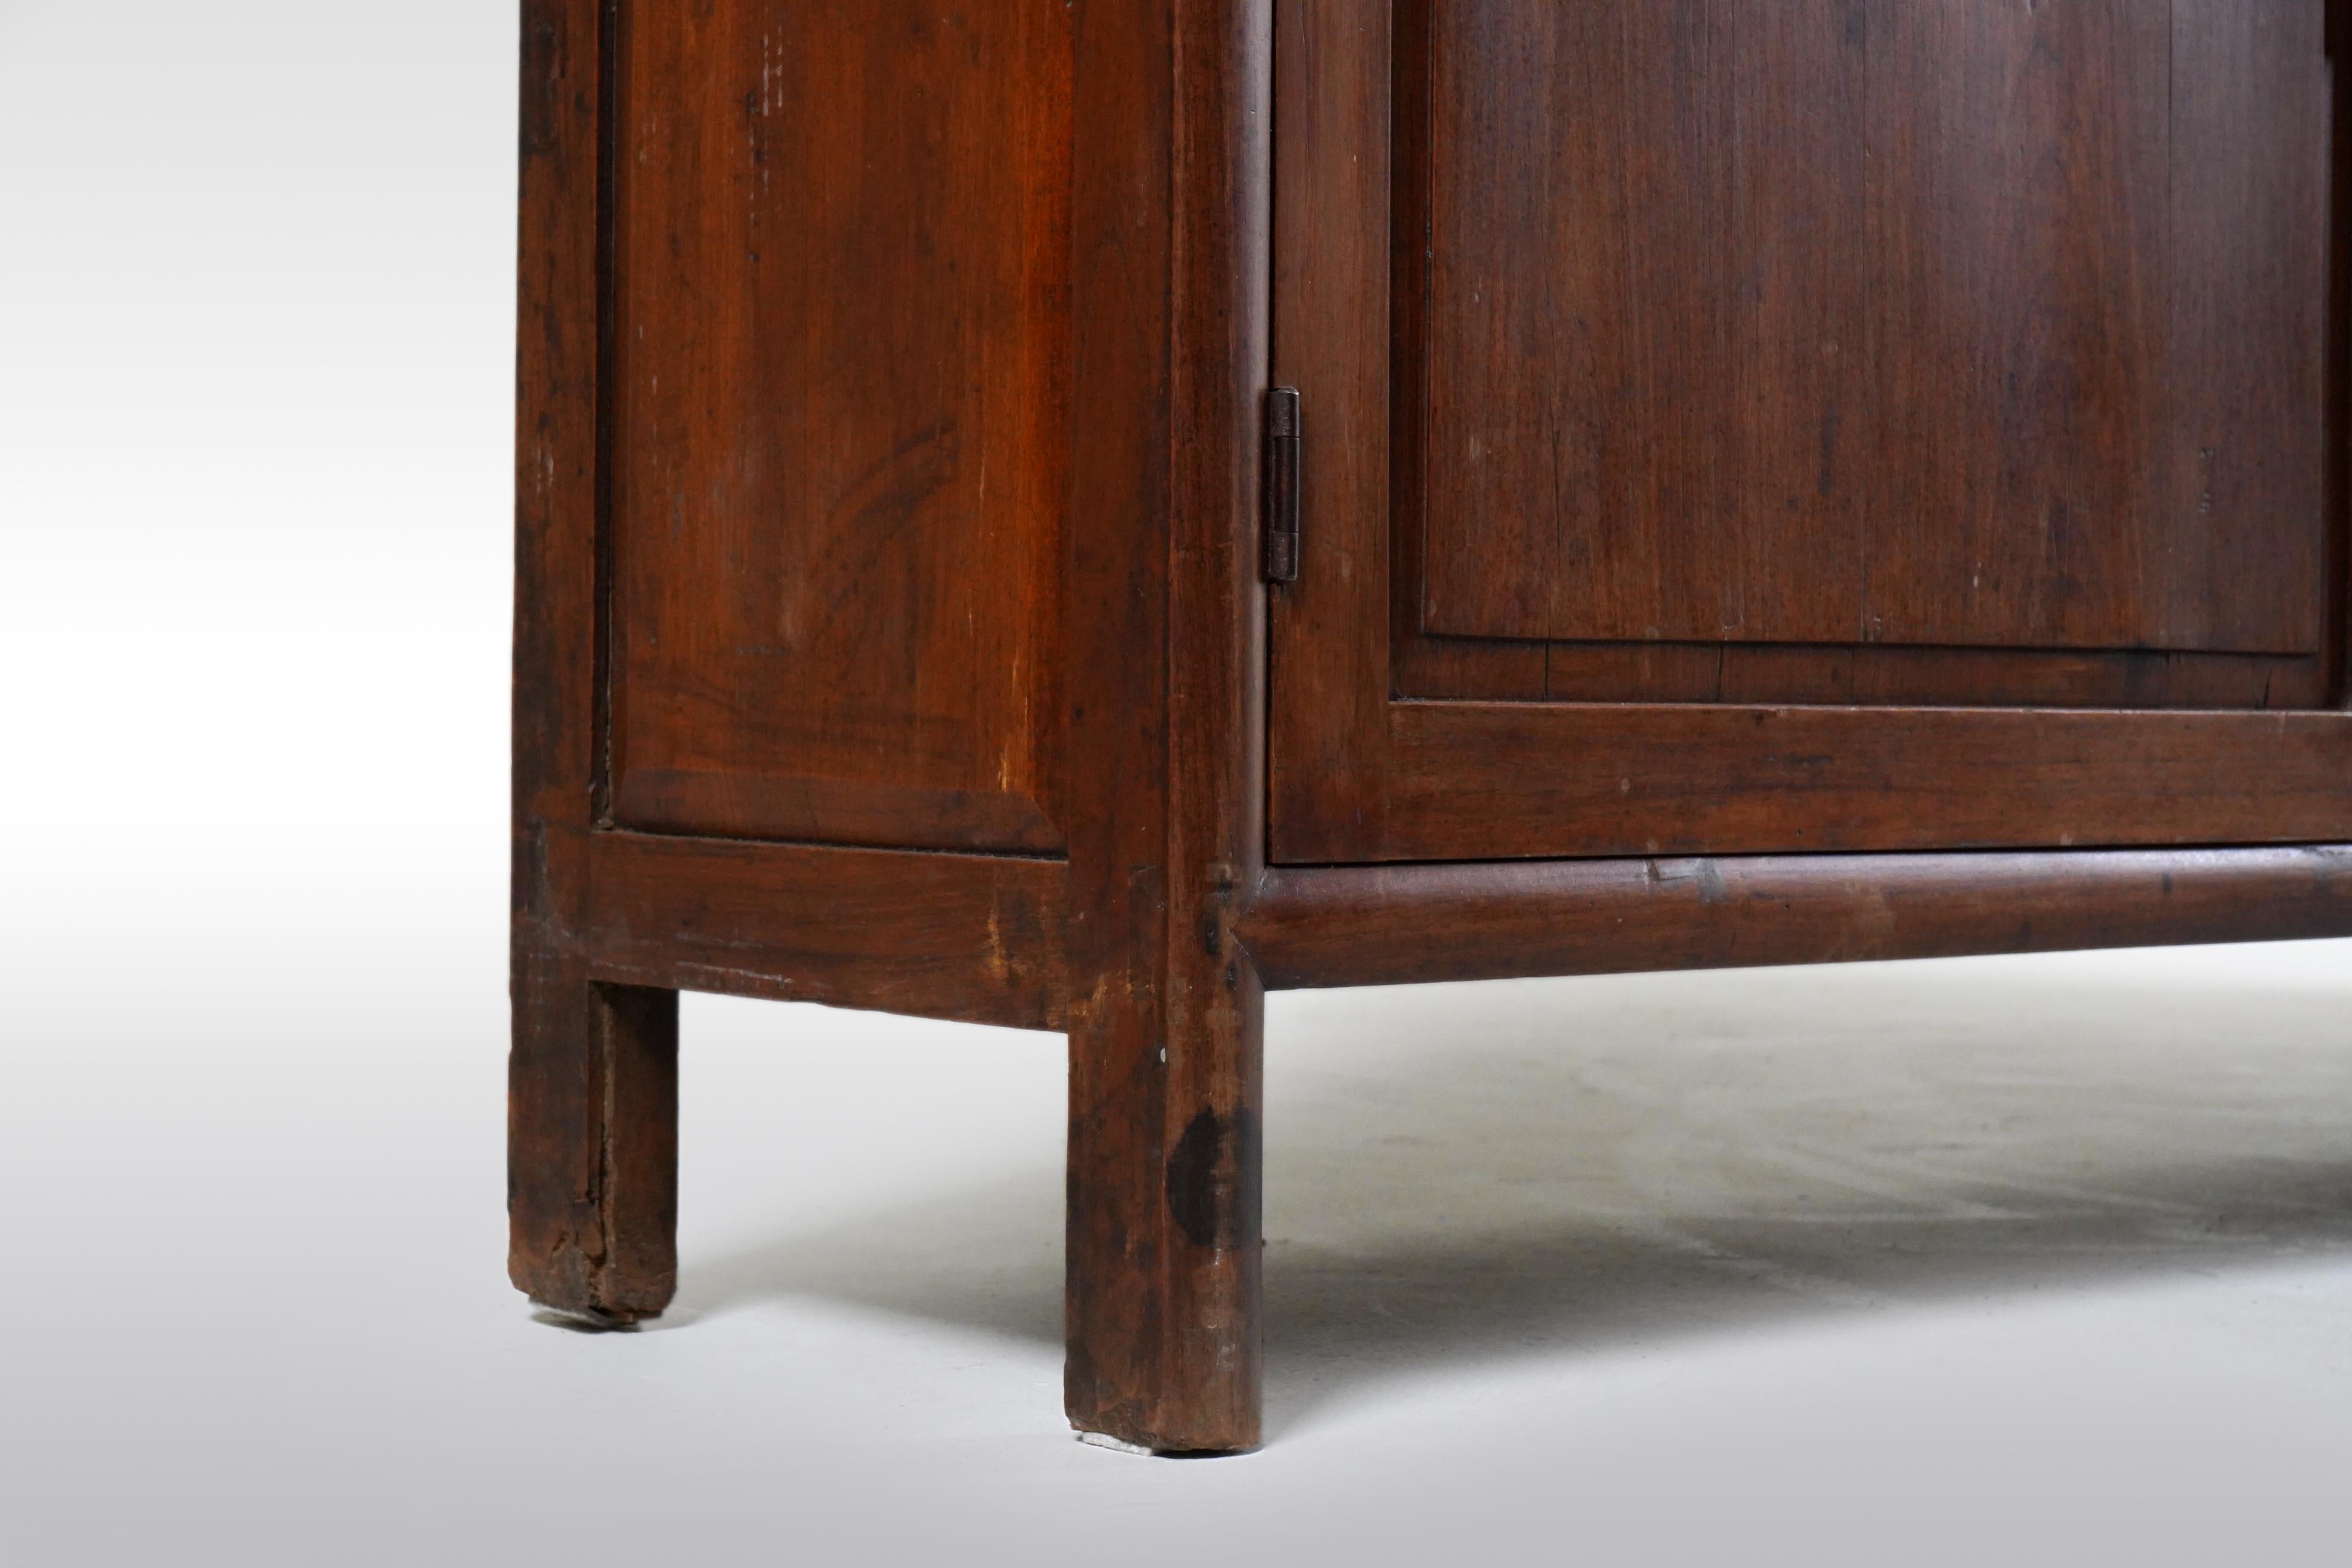 A British Colonial Art Deco Teak Bookcase with Lower Storage  6